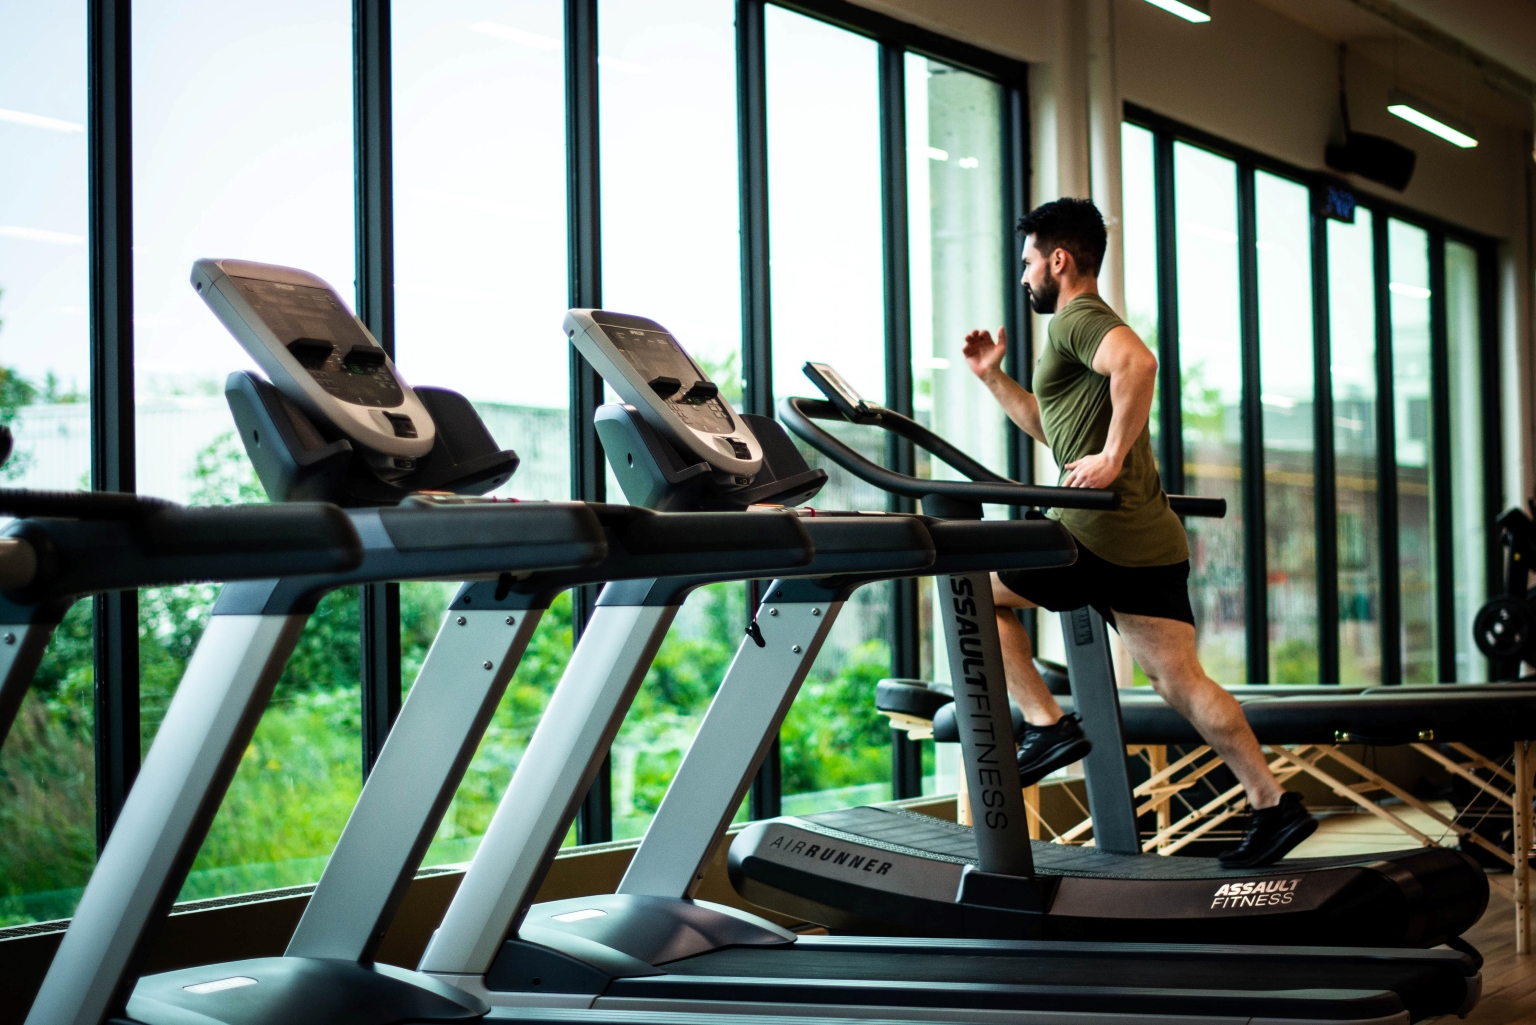 Thinking of setting-up a Physical Fitness Club Heres why you should do it in Dubai Mainland!